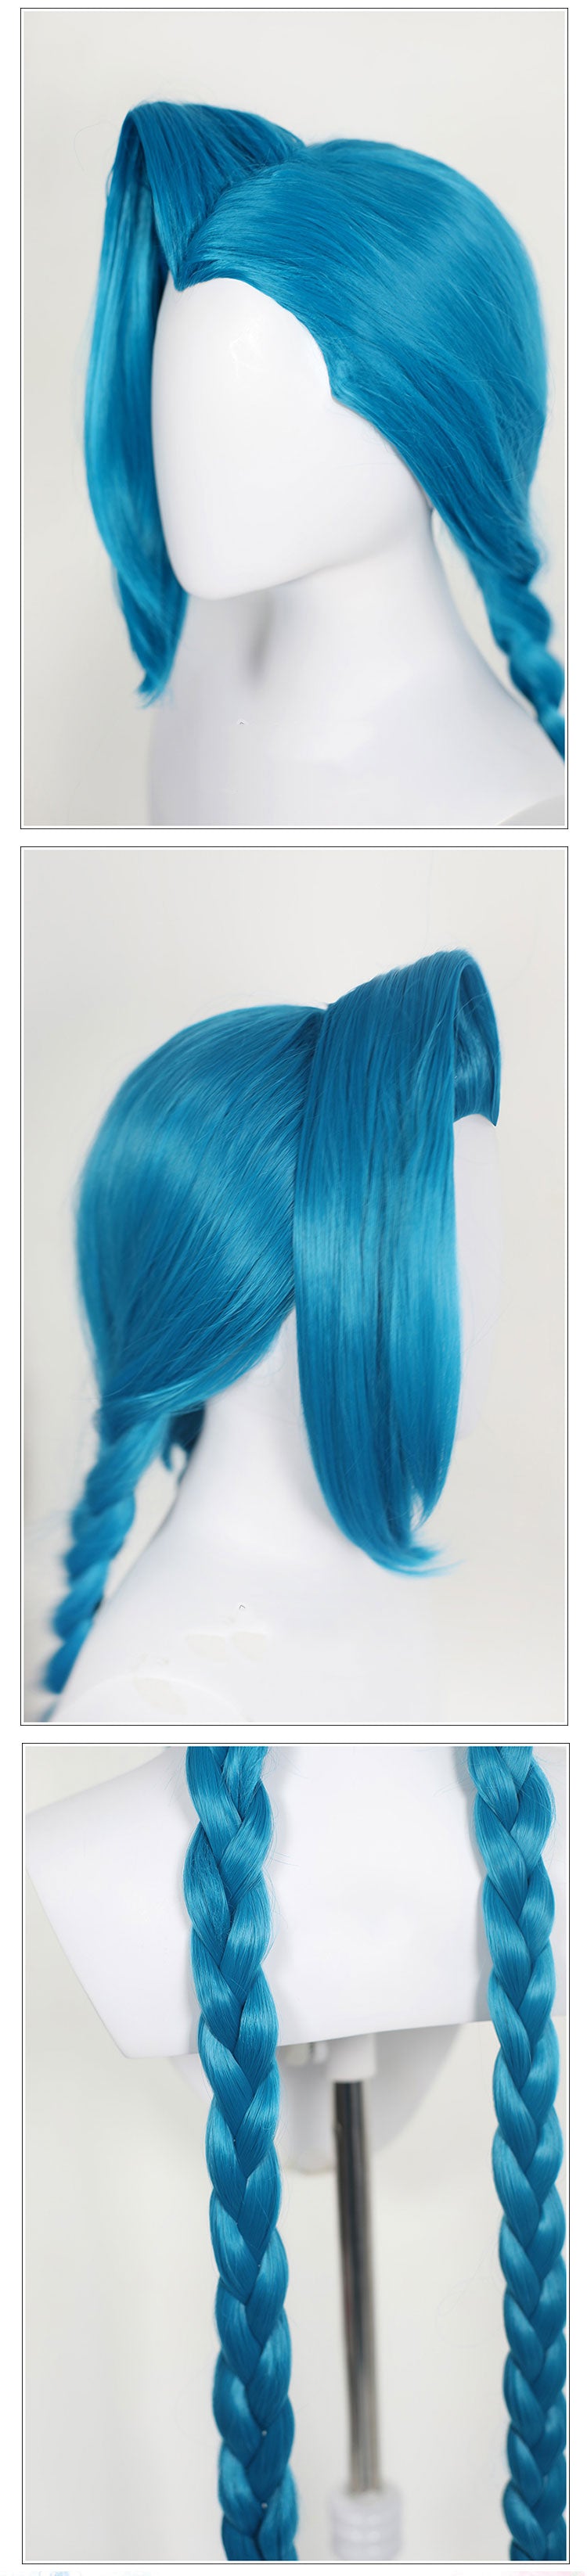 Game LOL League of Legends Jinx Long Blue Bunches Cosplay Wigs